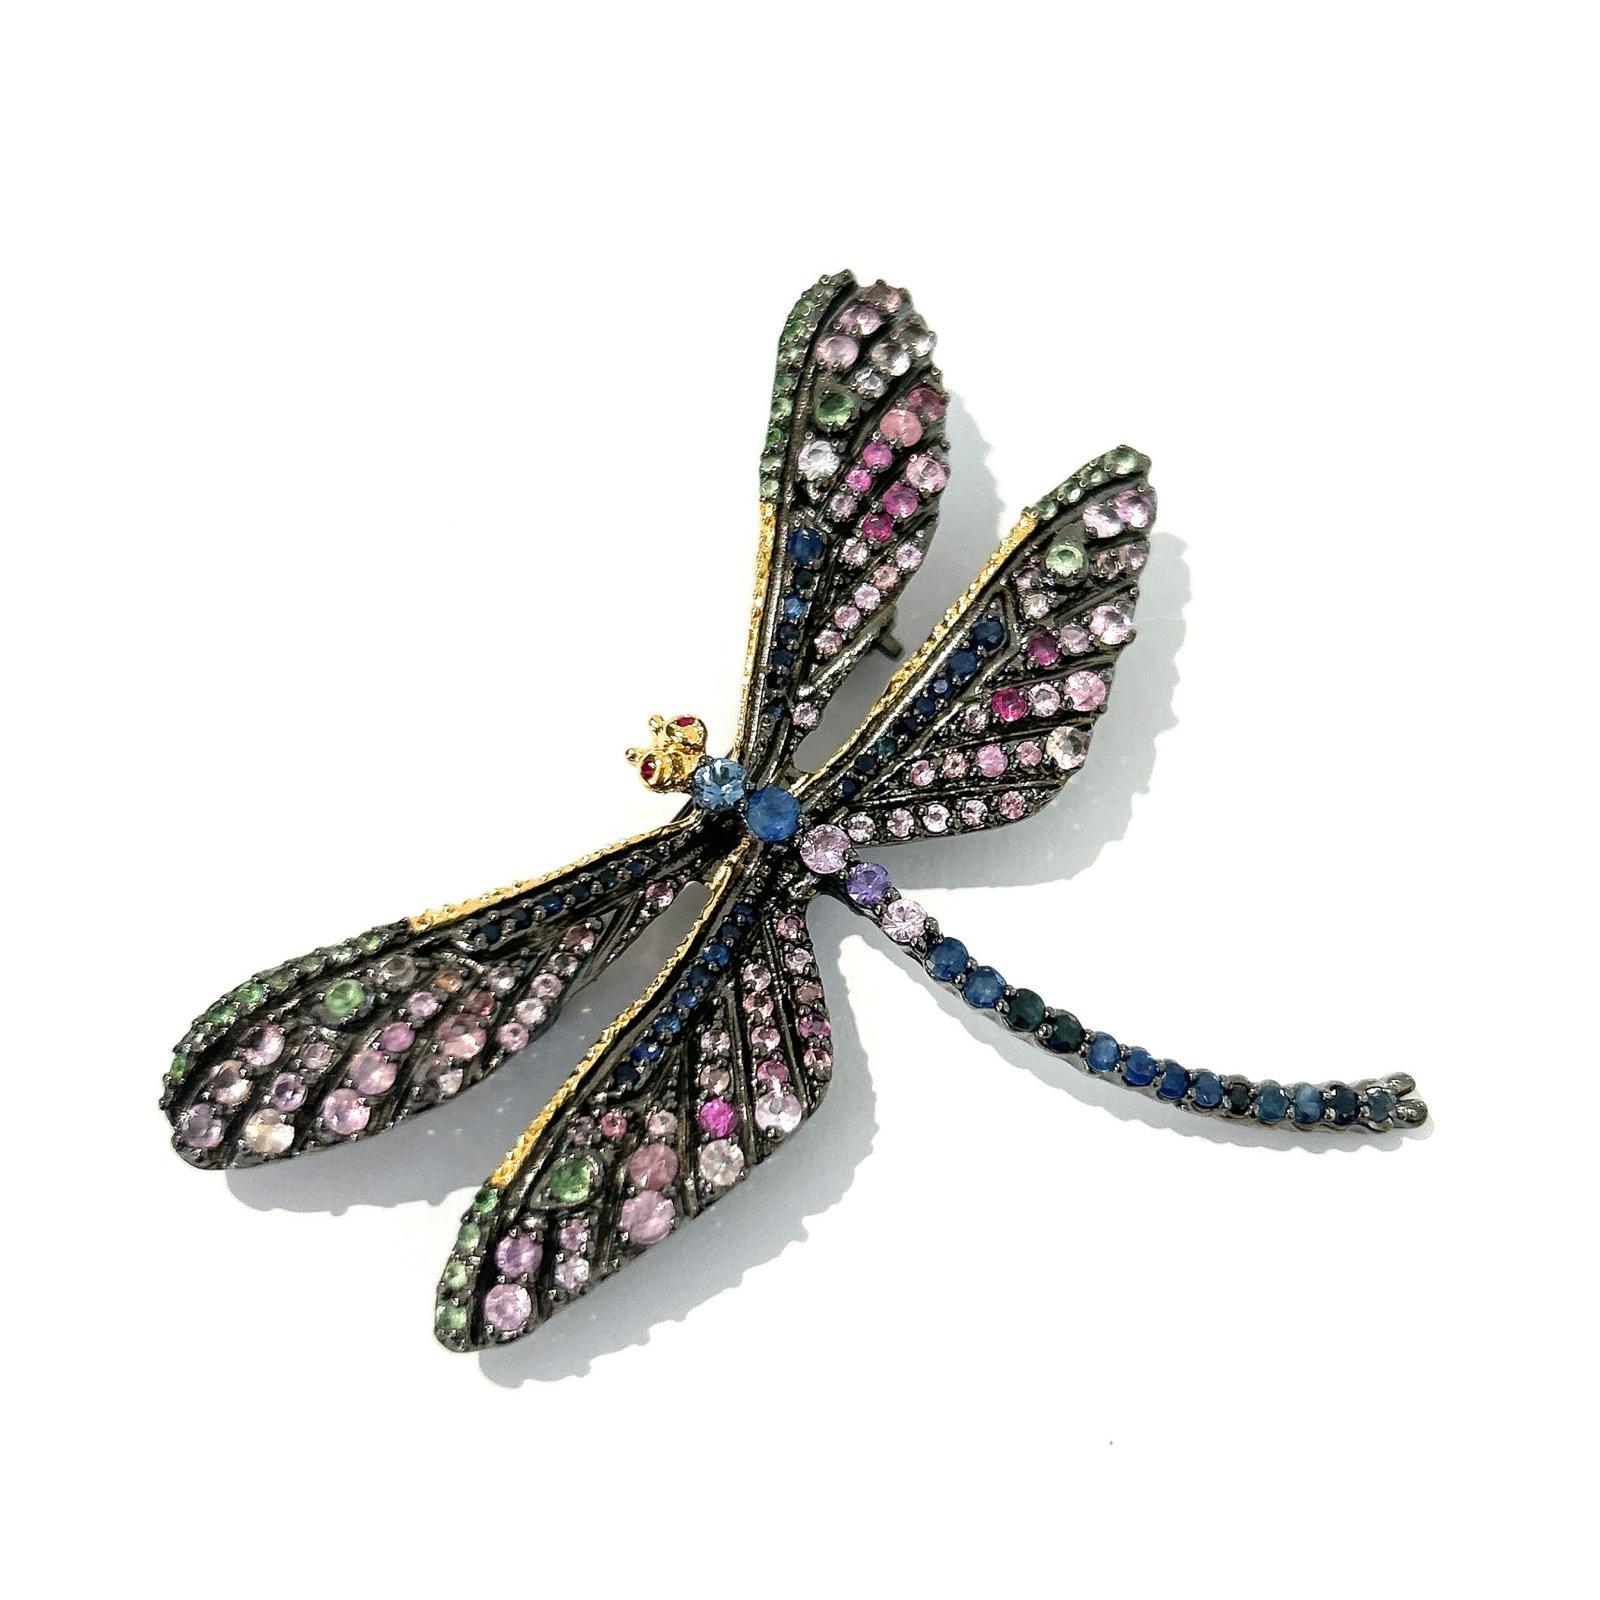 Bochic “Orient” Multi Sapphires & Ruby Brooch Set In 18K Gold & Silver 

Can be worn as a brooch and a pendant 

Natural light Fancy Pink/Red Ruby  - 1 carat 
Multi color Natural Sapphires from Sri Lanka 
3.carat

The Brooch is from the 